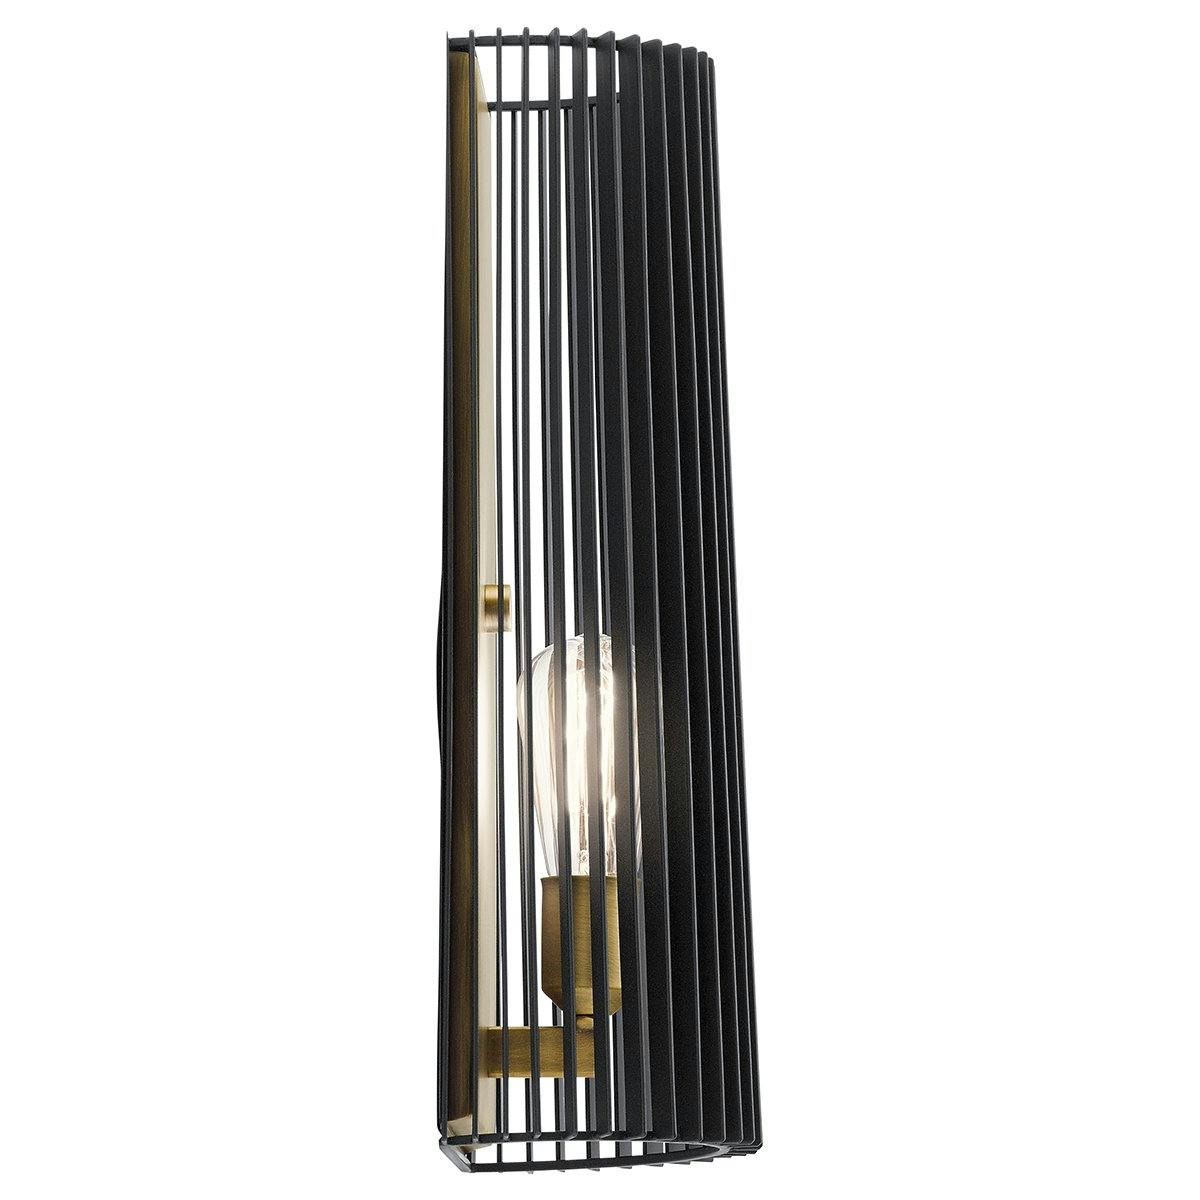 Profile view of the Linara 1 Light Wall Sconce Black on a white background